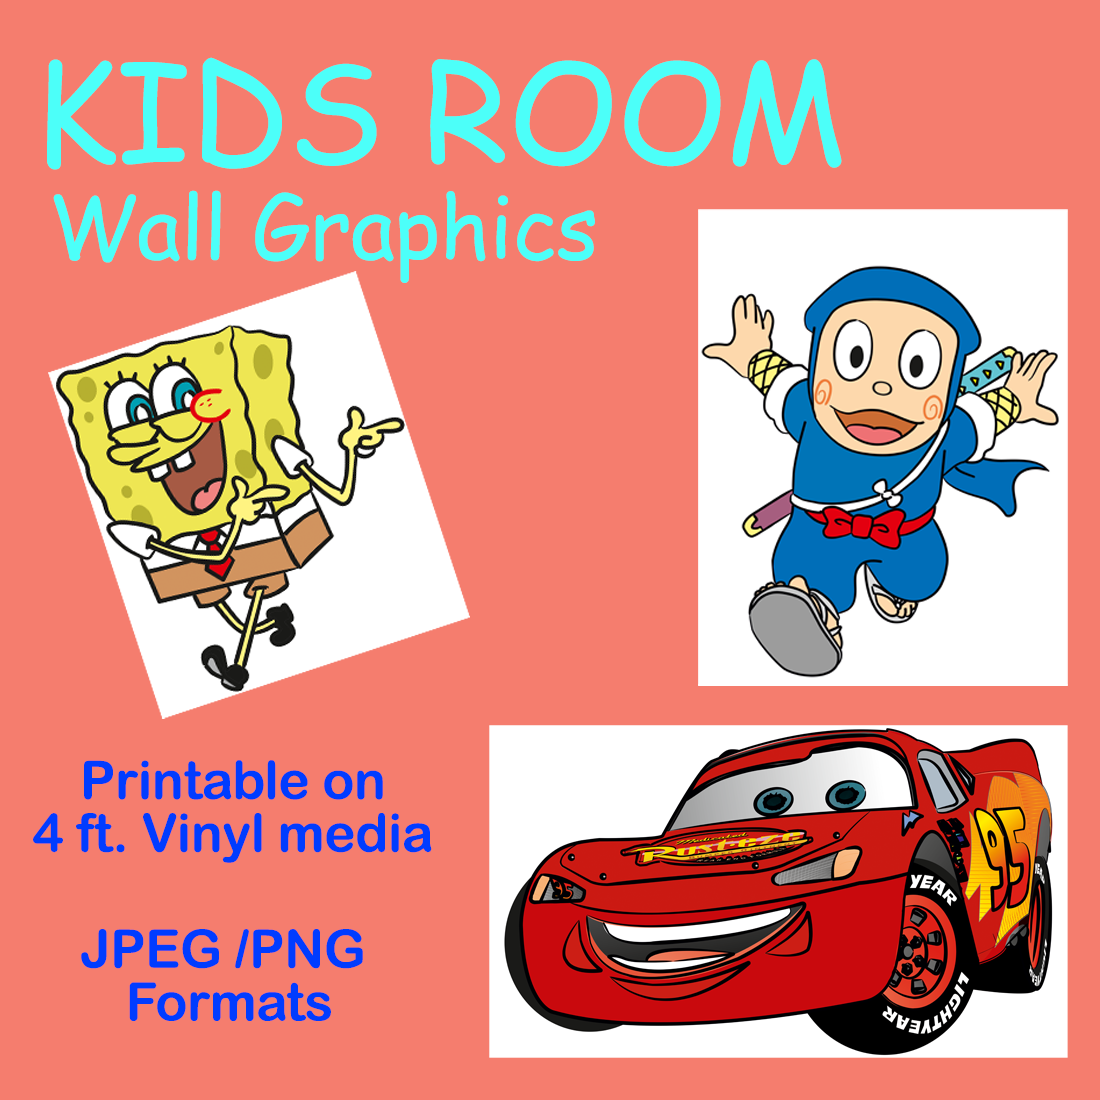 Kids Room Wall Graphics and Stickers preview image.